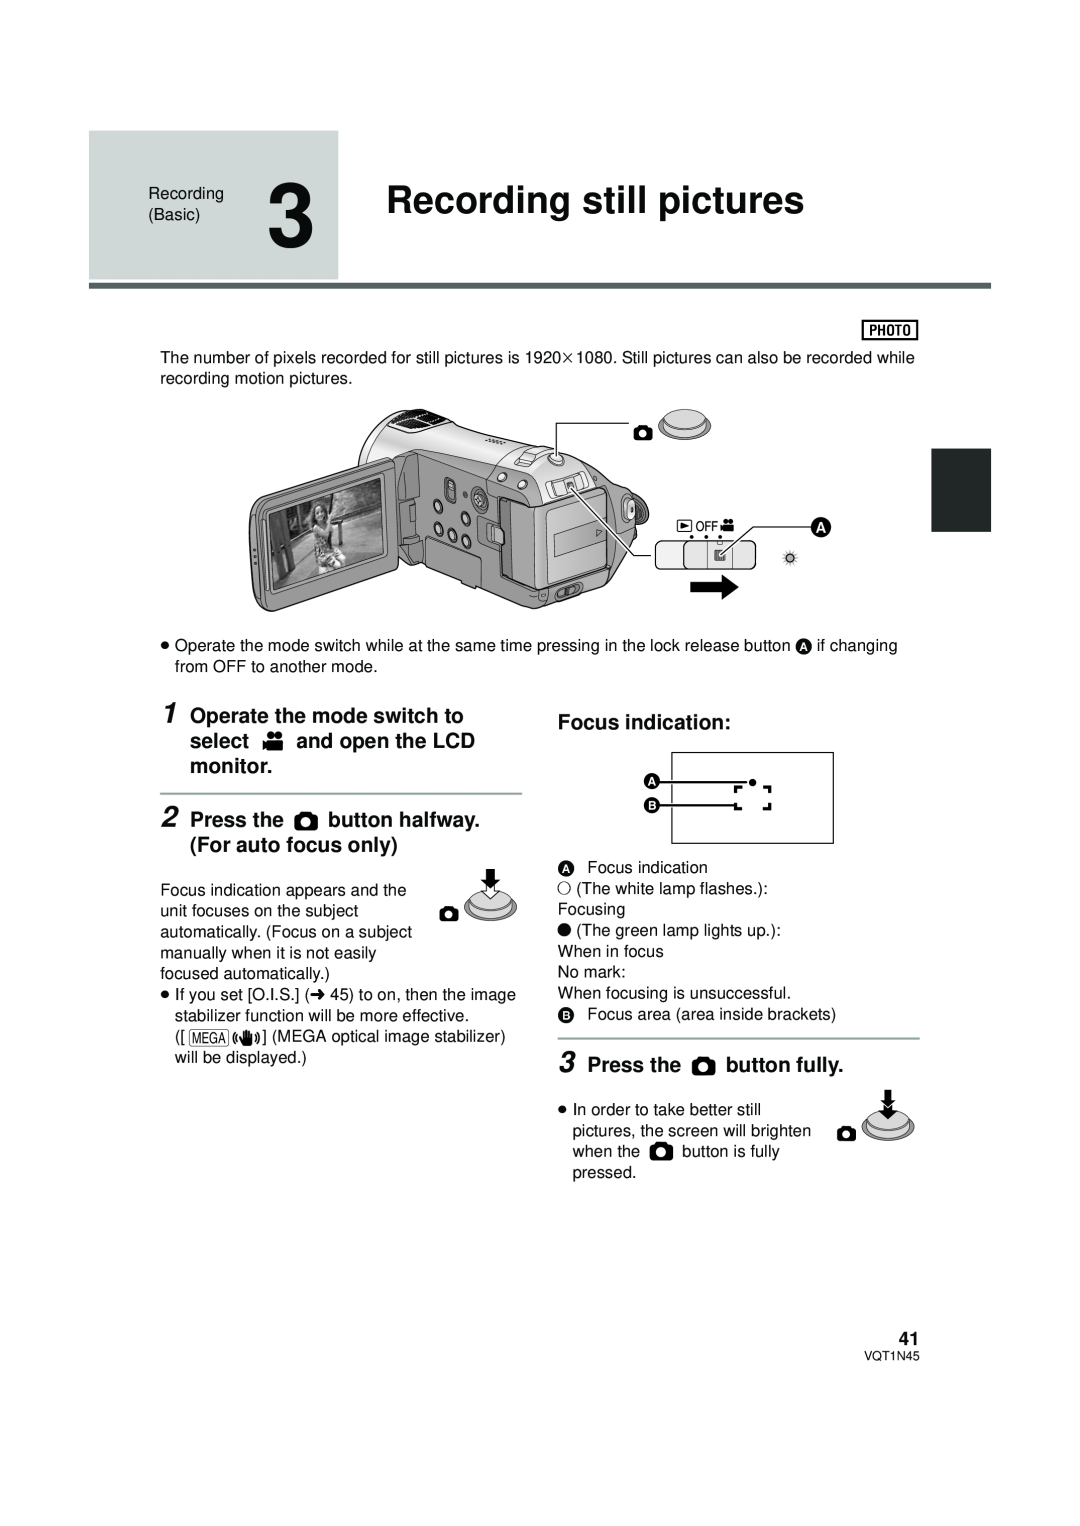 Panasonic HDC-SD9PC manual Recording still pictures, Press the button halfway. For auto focus only, Focus indication 